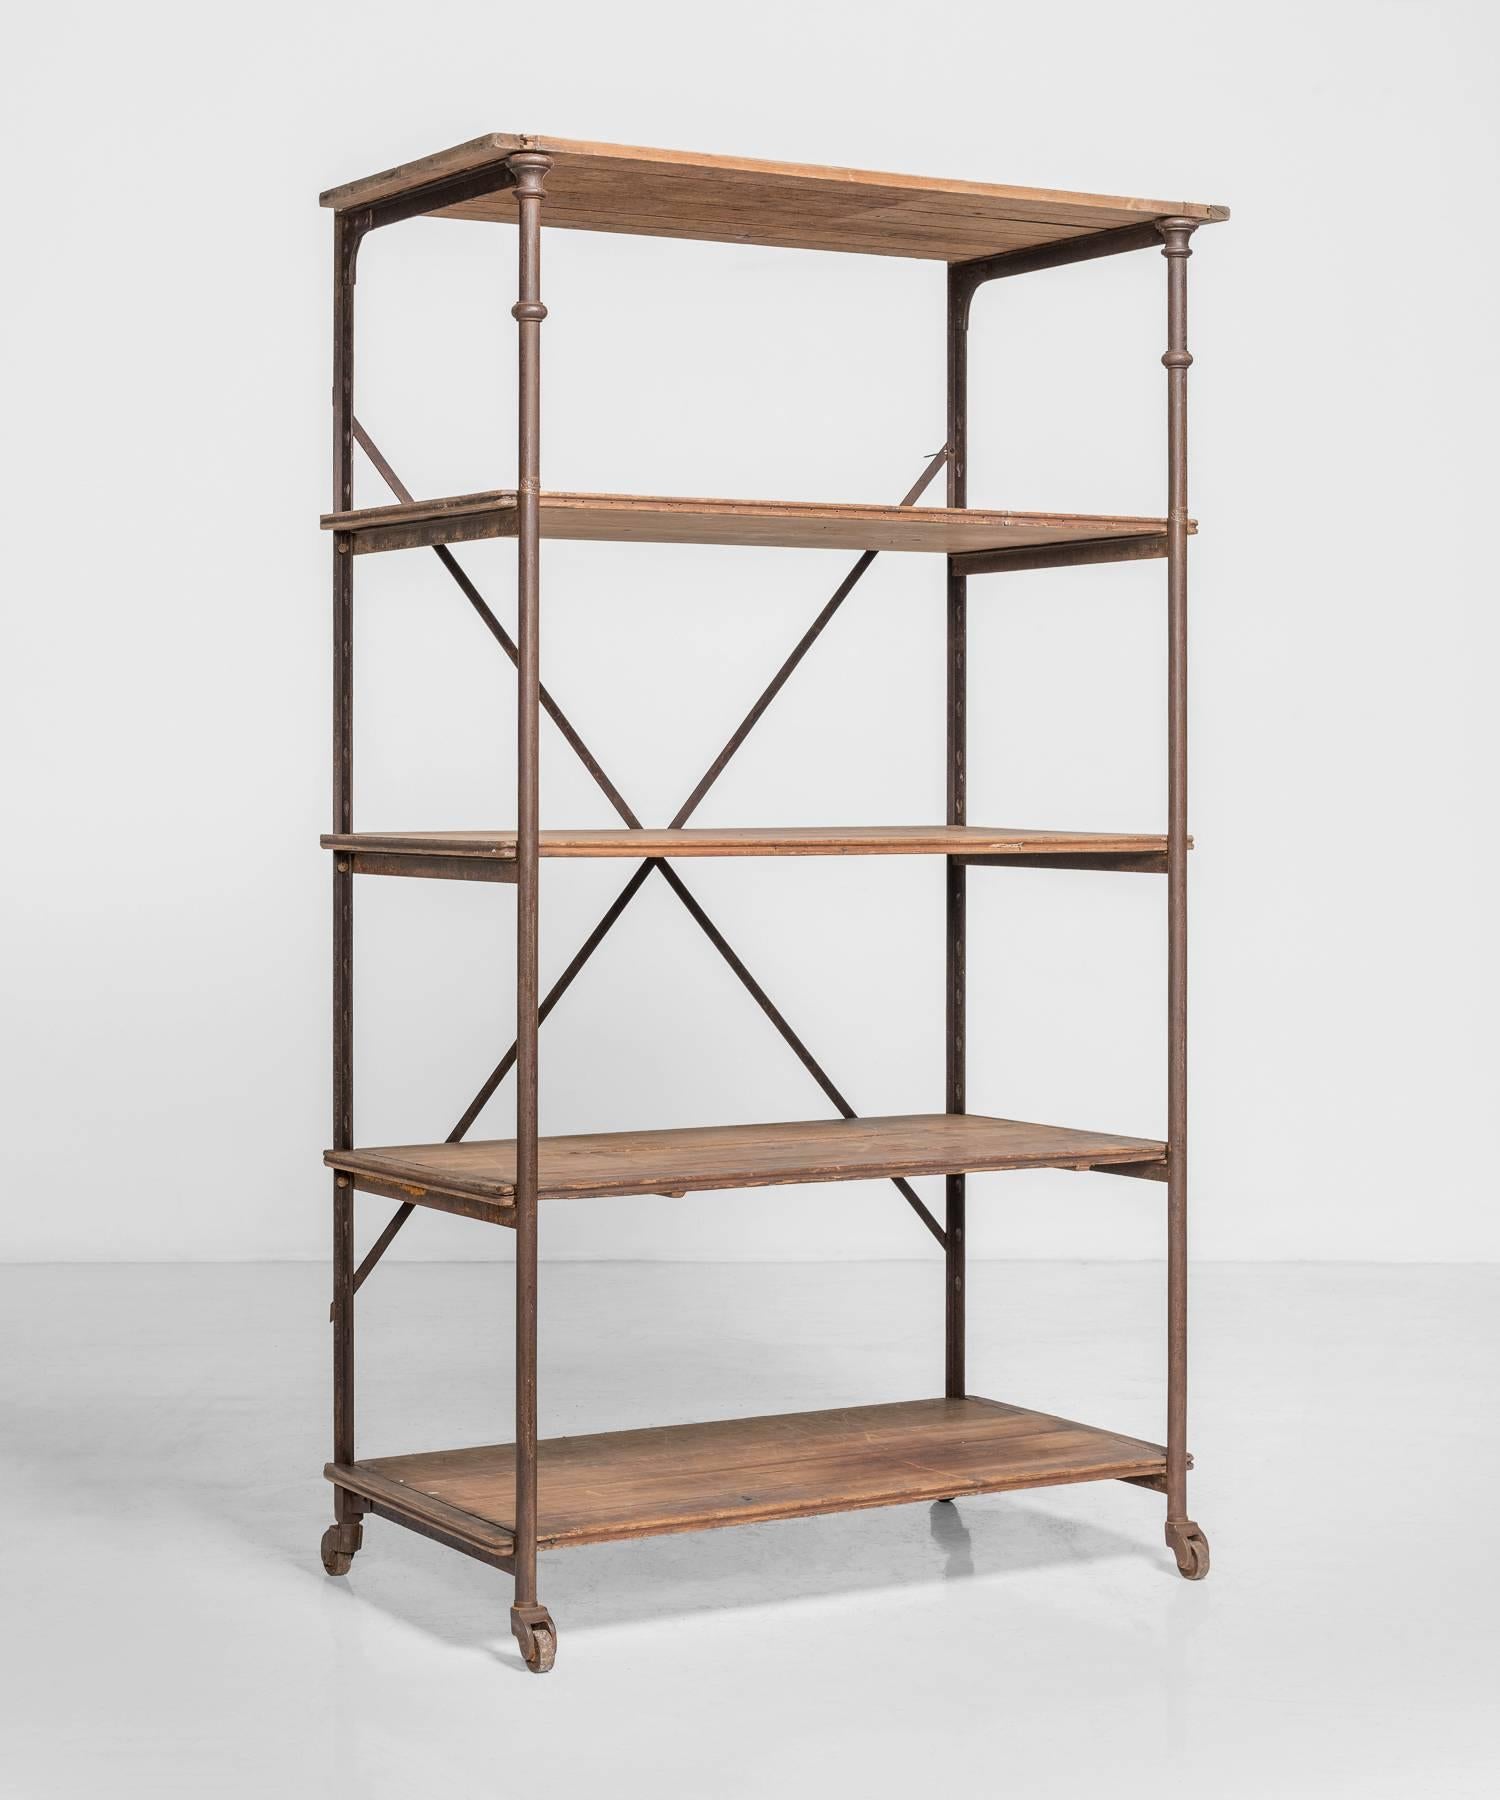 Painted iron frame with oak shelves. Manufactured by TH Scherf, 49 Rue Lauriston, Paris.